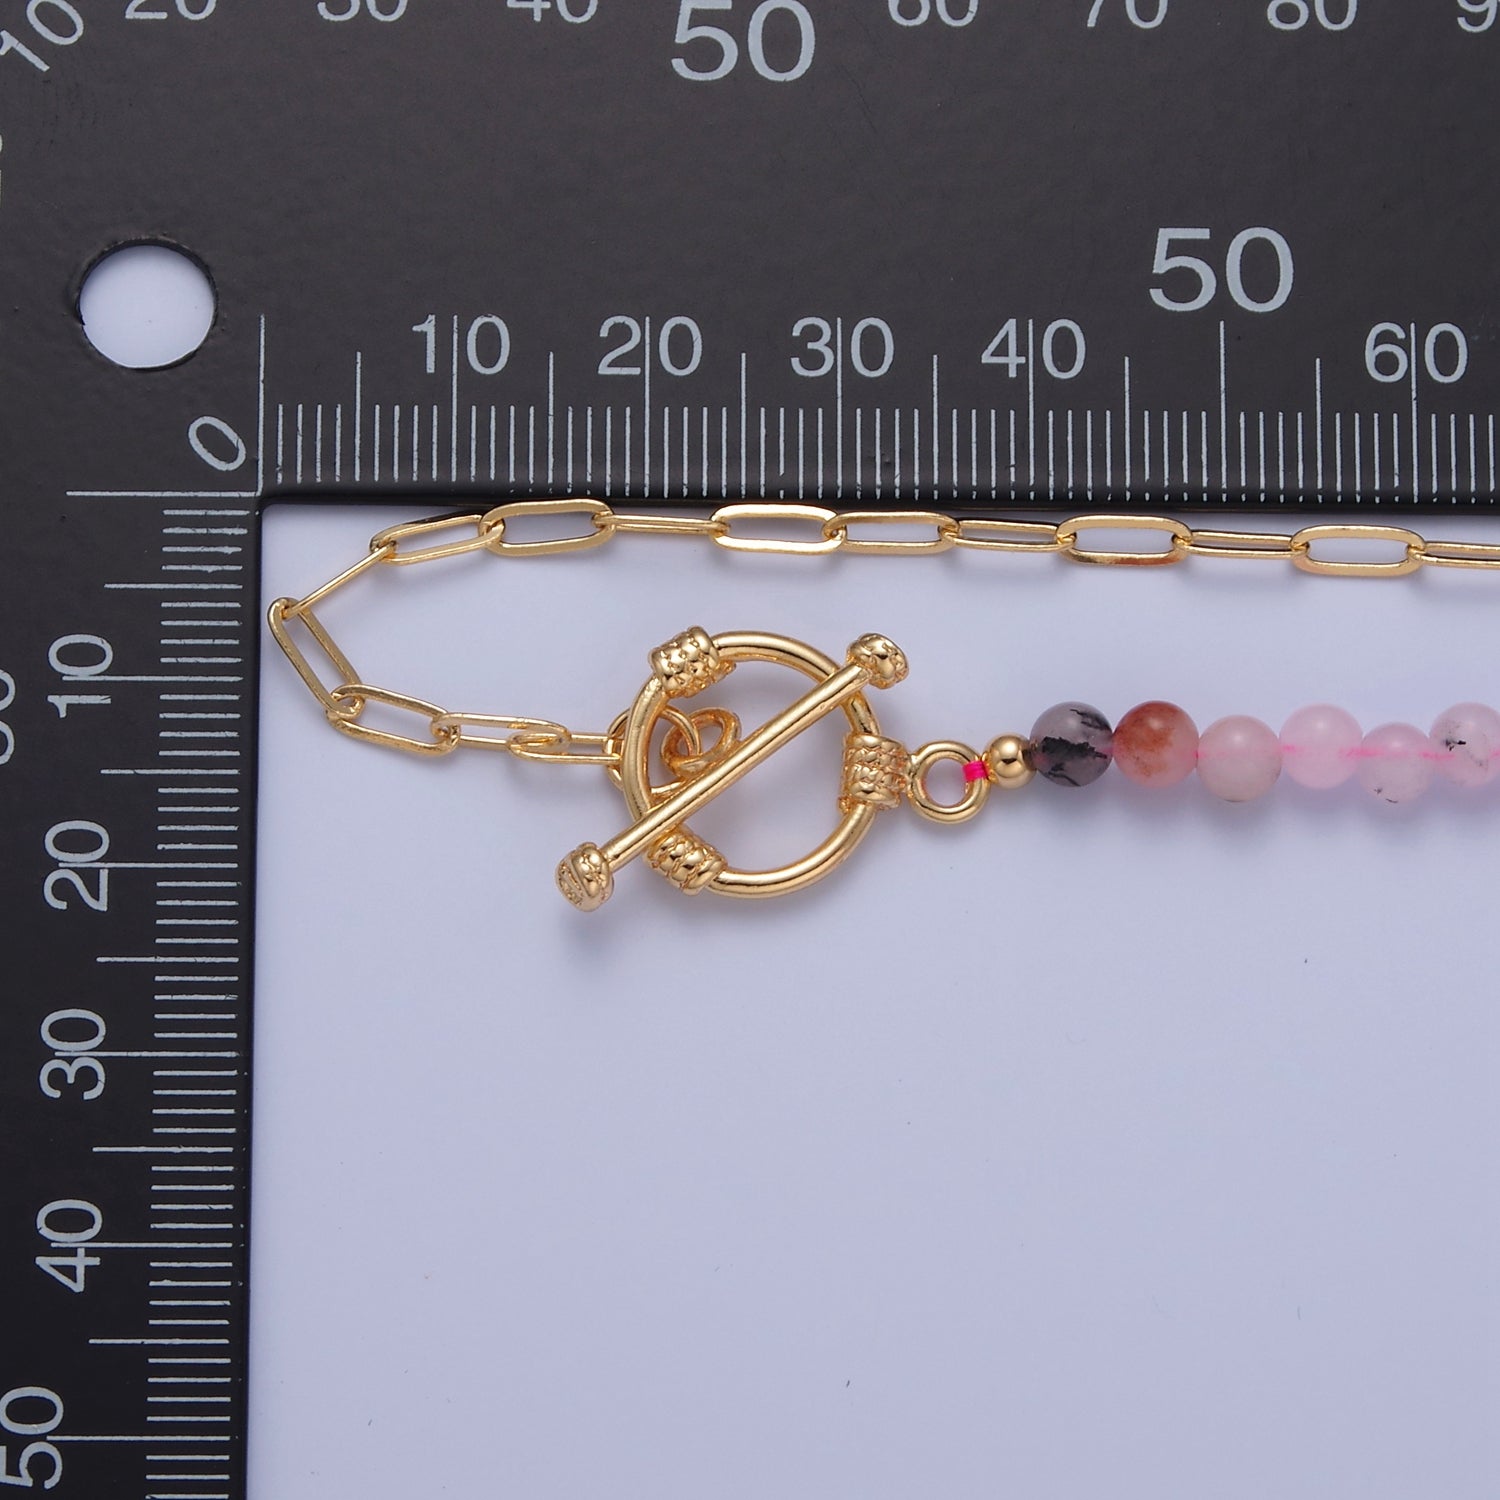 Dainty Half Bead Half Link Chain Necklace, 24k Gold Filled Paperclip Chain with Pink Jade Necklace Toggle Clasp WA-971 - DLUXCA